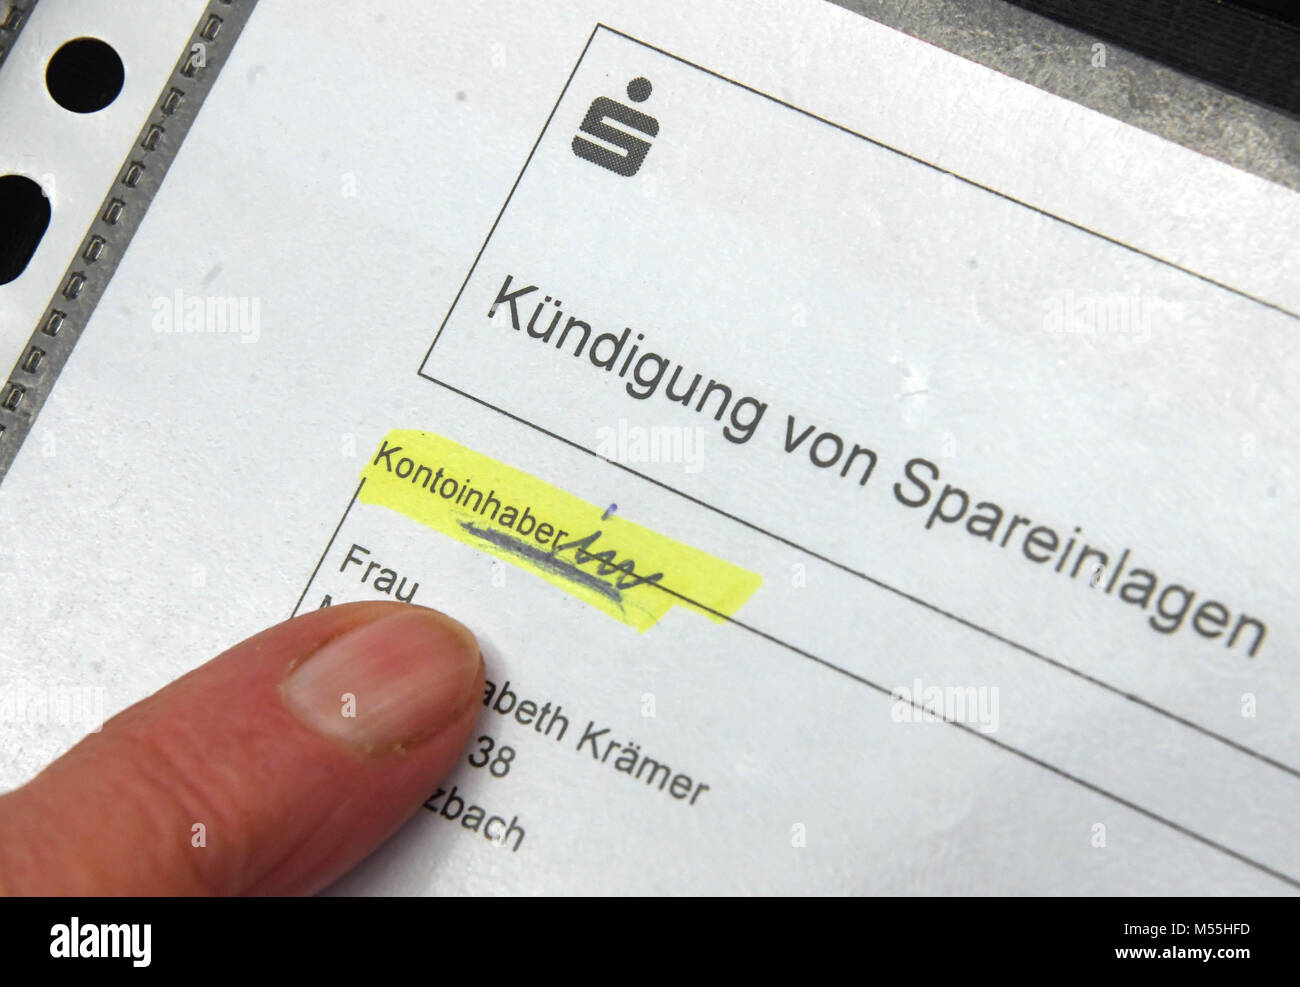 20 February 2018, Germany, Karlsruhe: Forms of a the Sparkasse with male address are shown during the trial at the Federal Supreme Court (BGH). A pensioner filed a lawsuit that Sparkasse is to name the female term of 'Kontoinhaber' (lit. account holder), being 'Kontoinhaberin' on their forms. Photo: Uli Deck/dpa Stock Photo